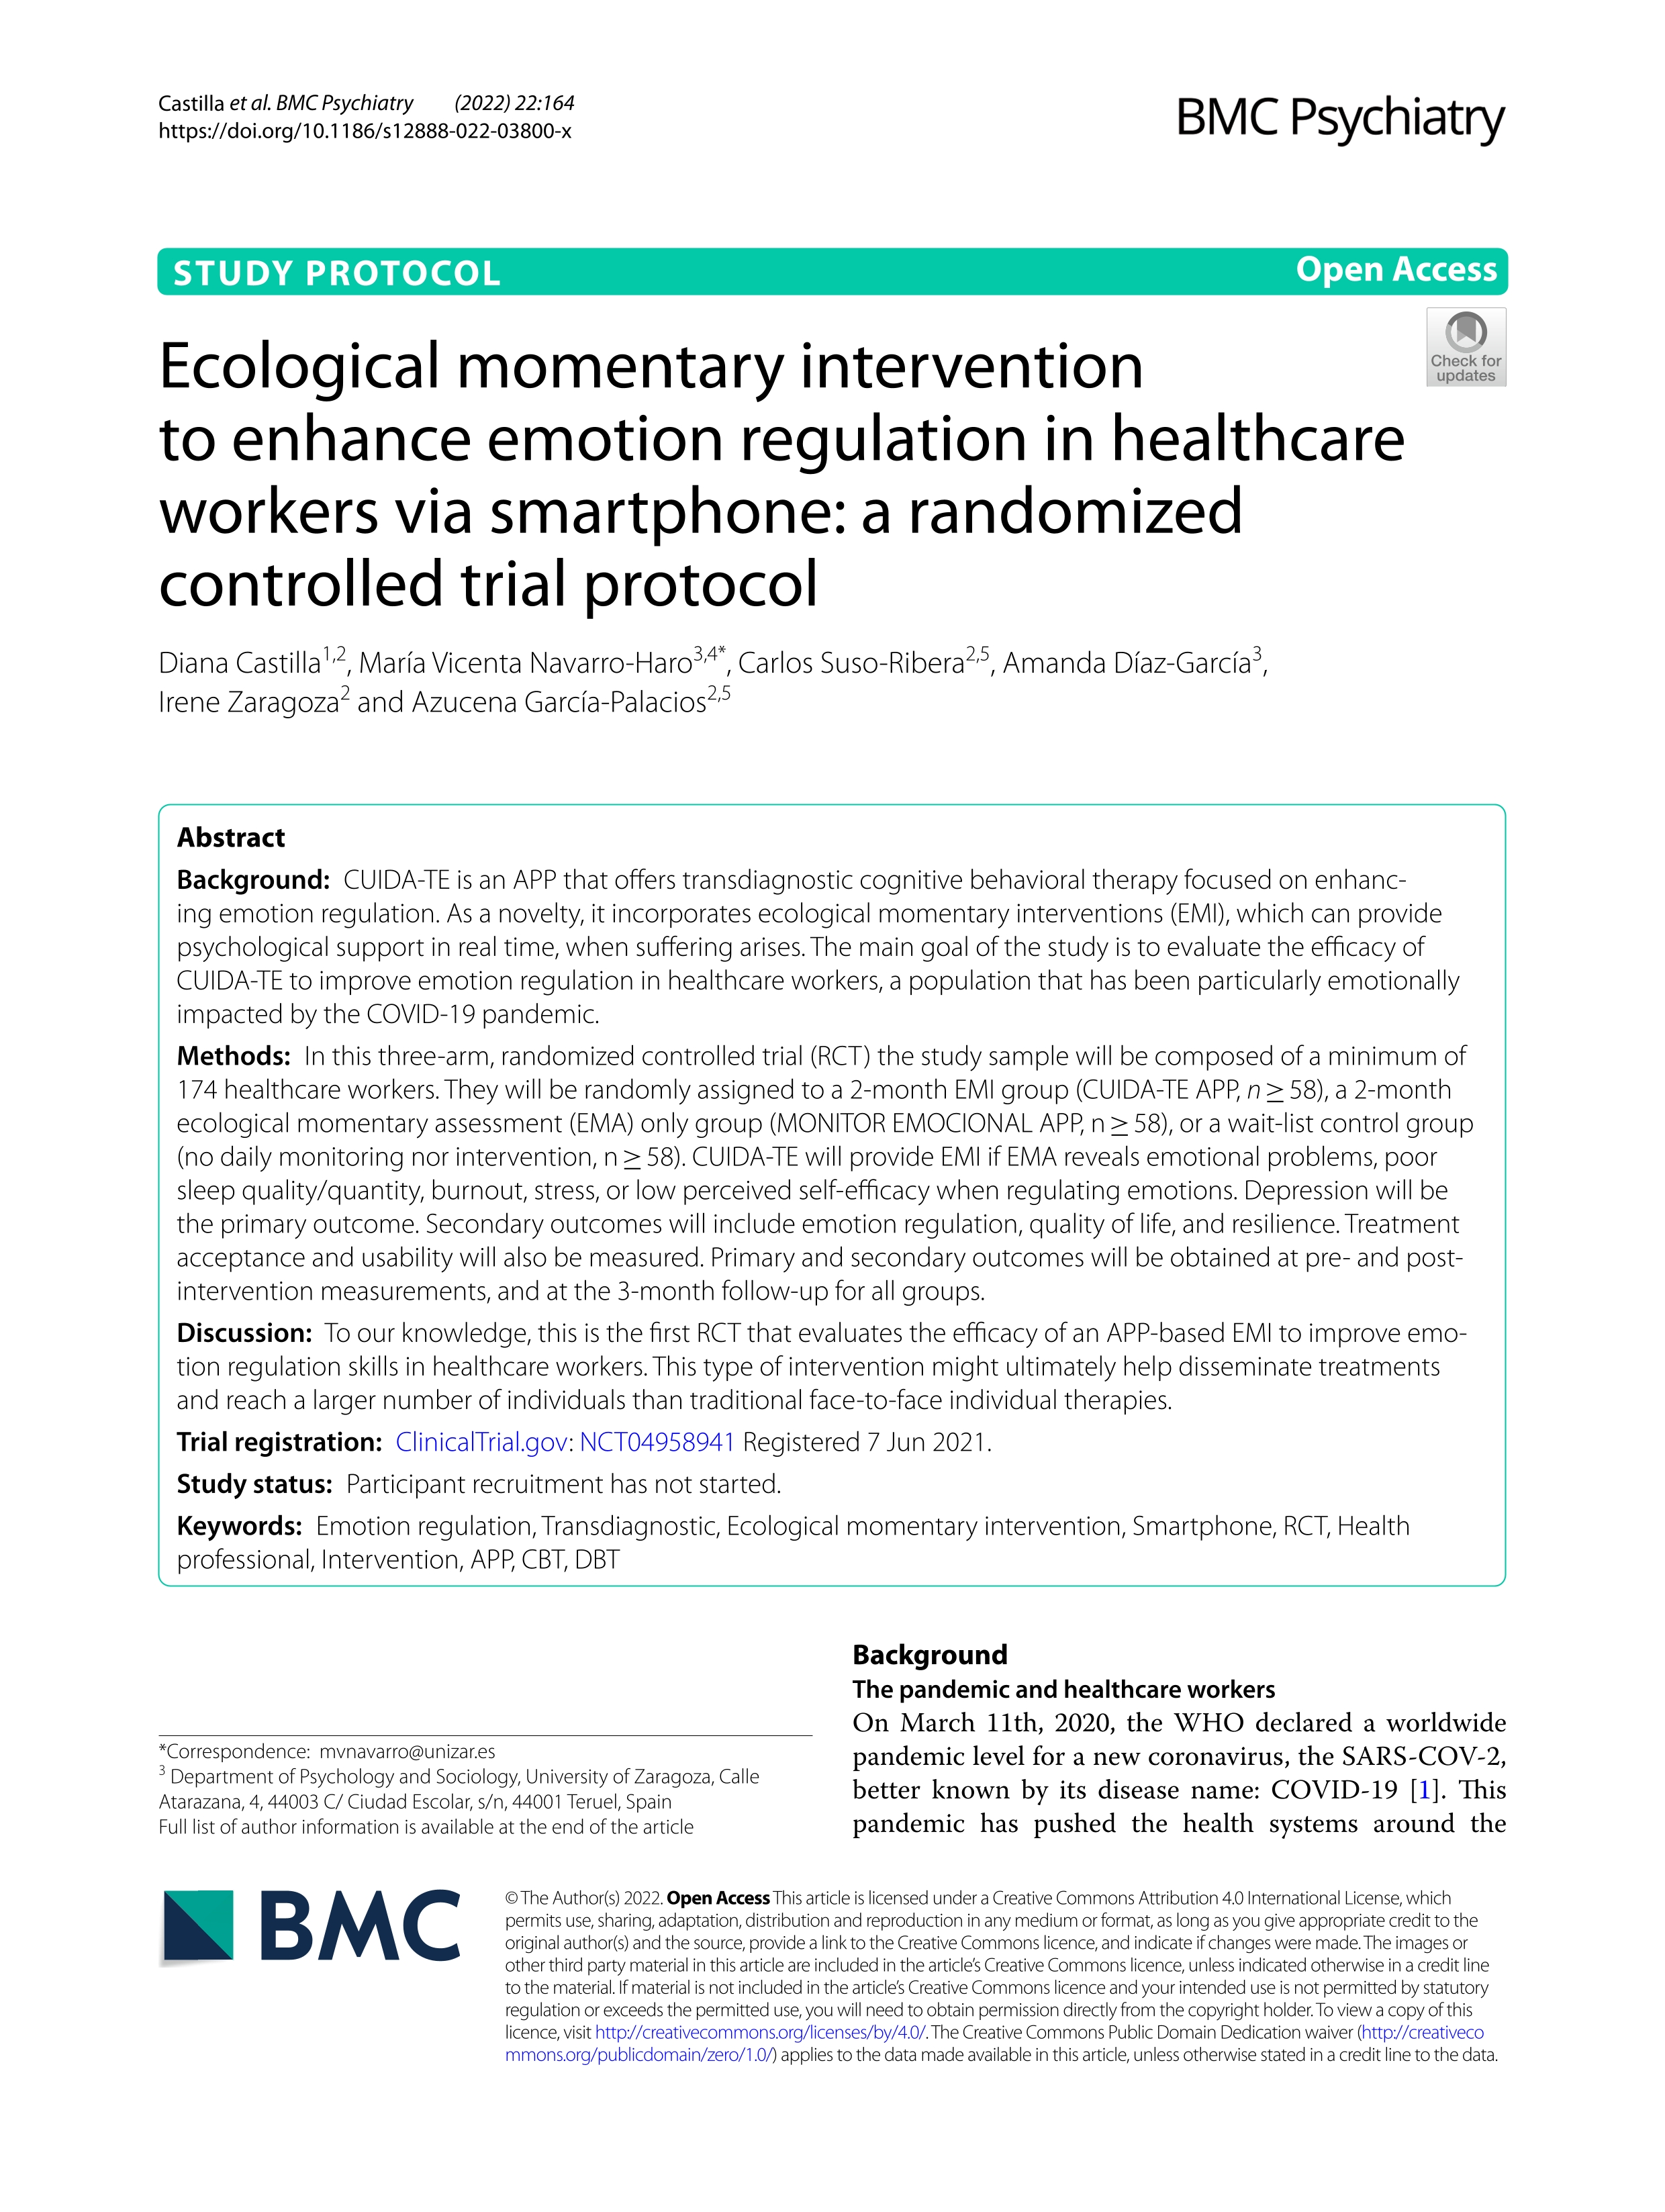 Ecological momentary intervention to enhance emotion regulation in healthcare workers via smartphone: a randomized controlled trial protocol